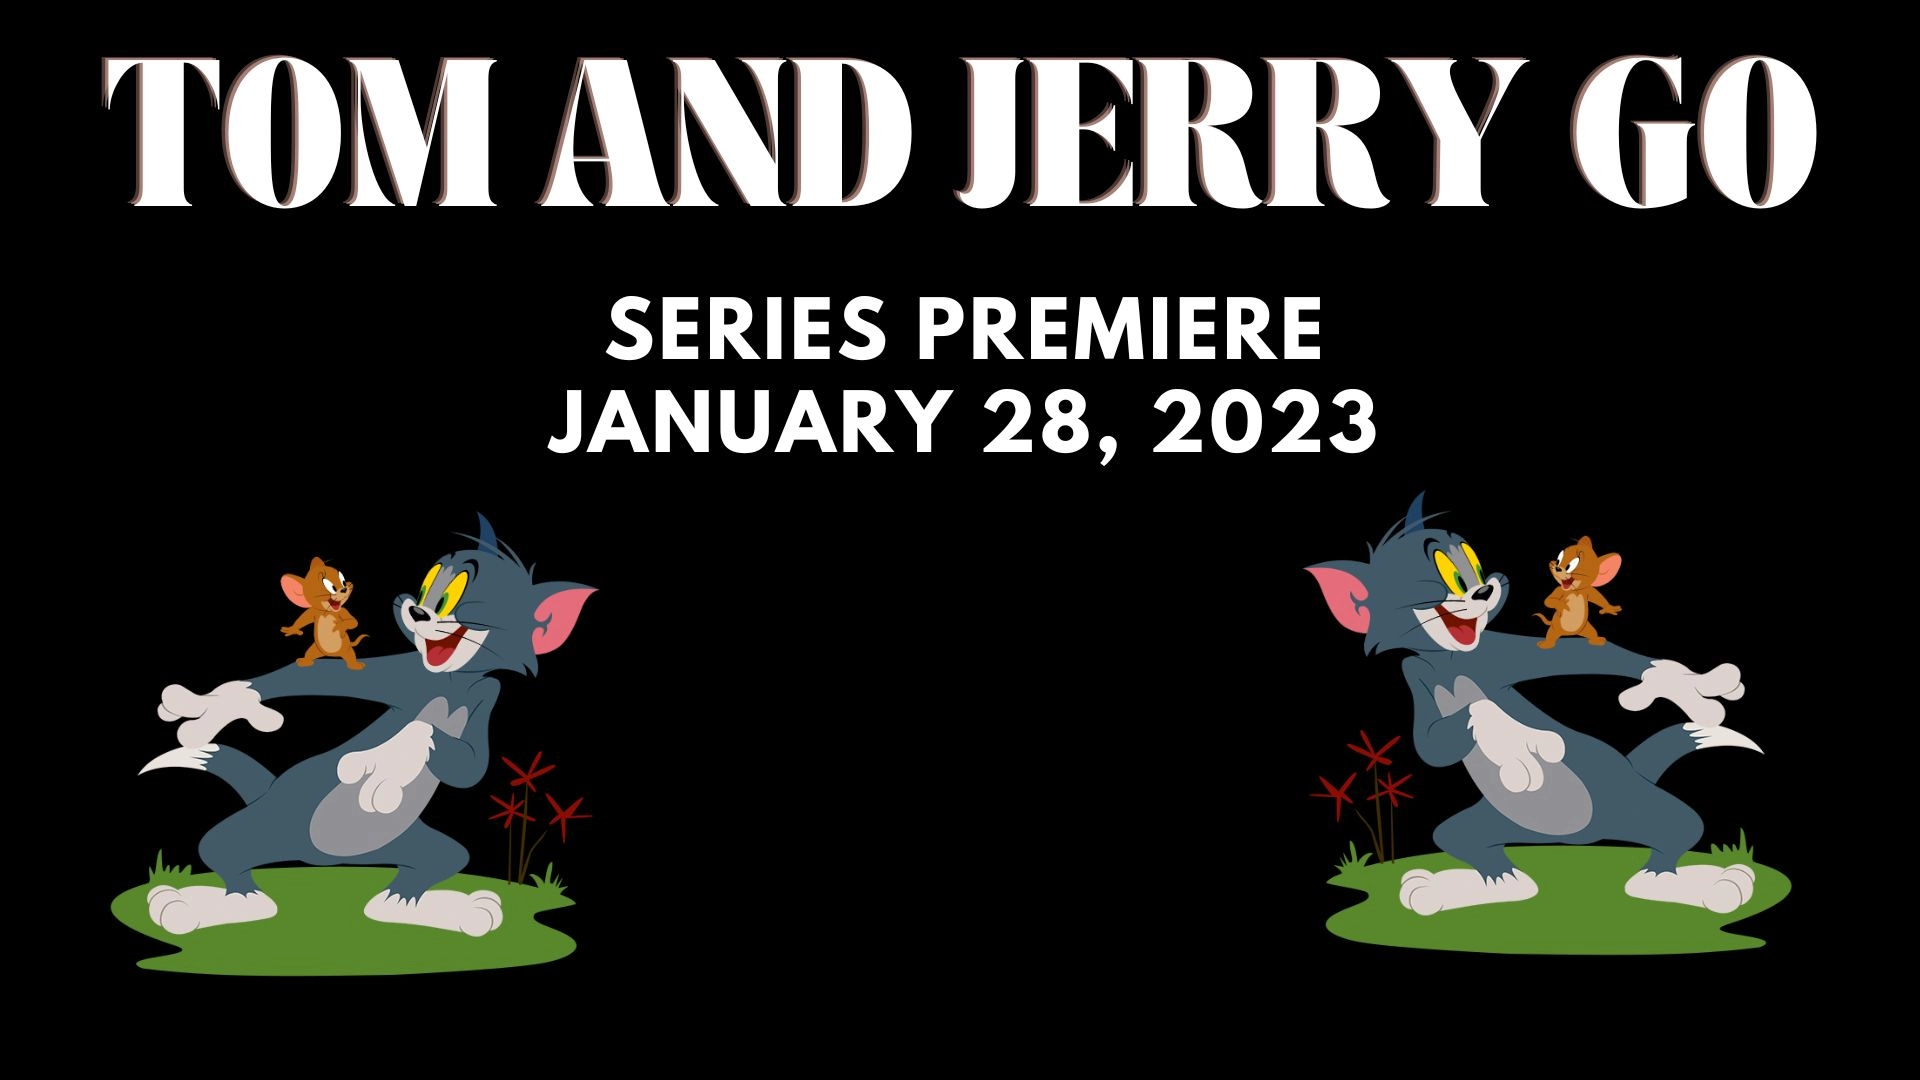 Tom and Jerry Go Parents Guide and Age Rating (2023)